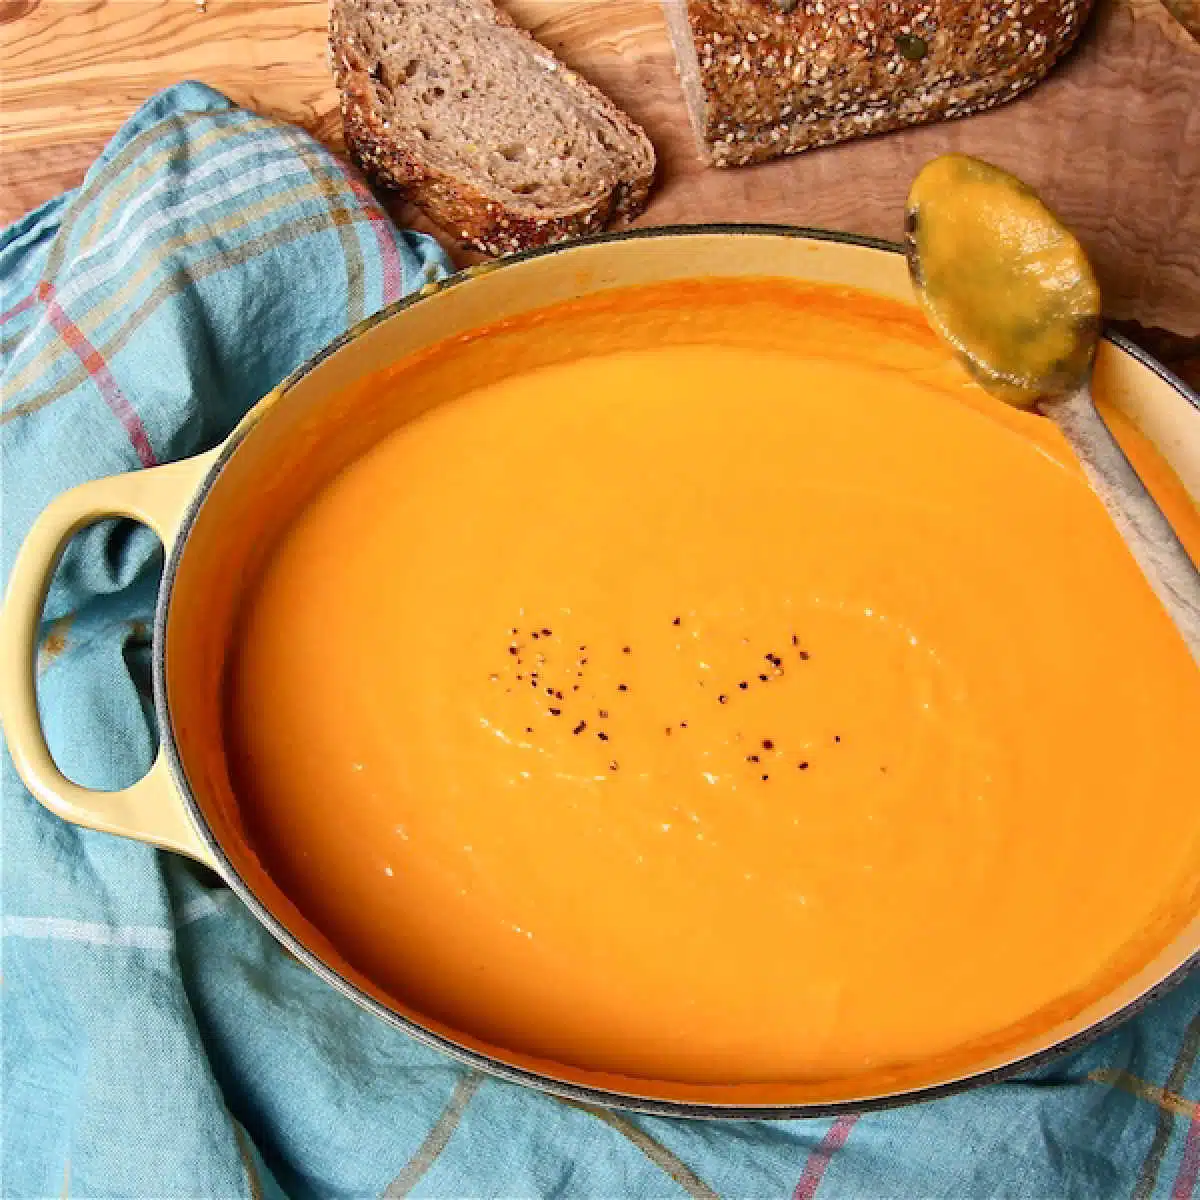 A big pot of silky sweet potato and carrot soup, with a few slices of bread on the side.